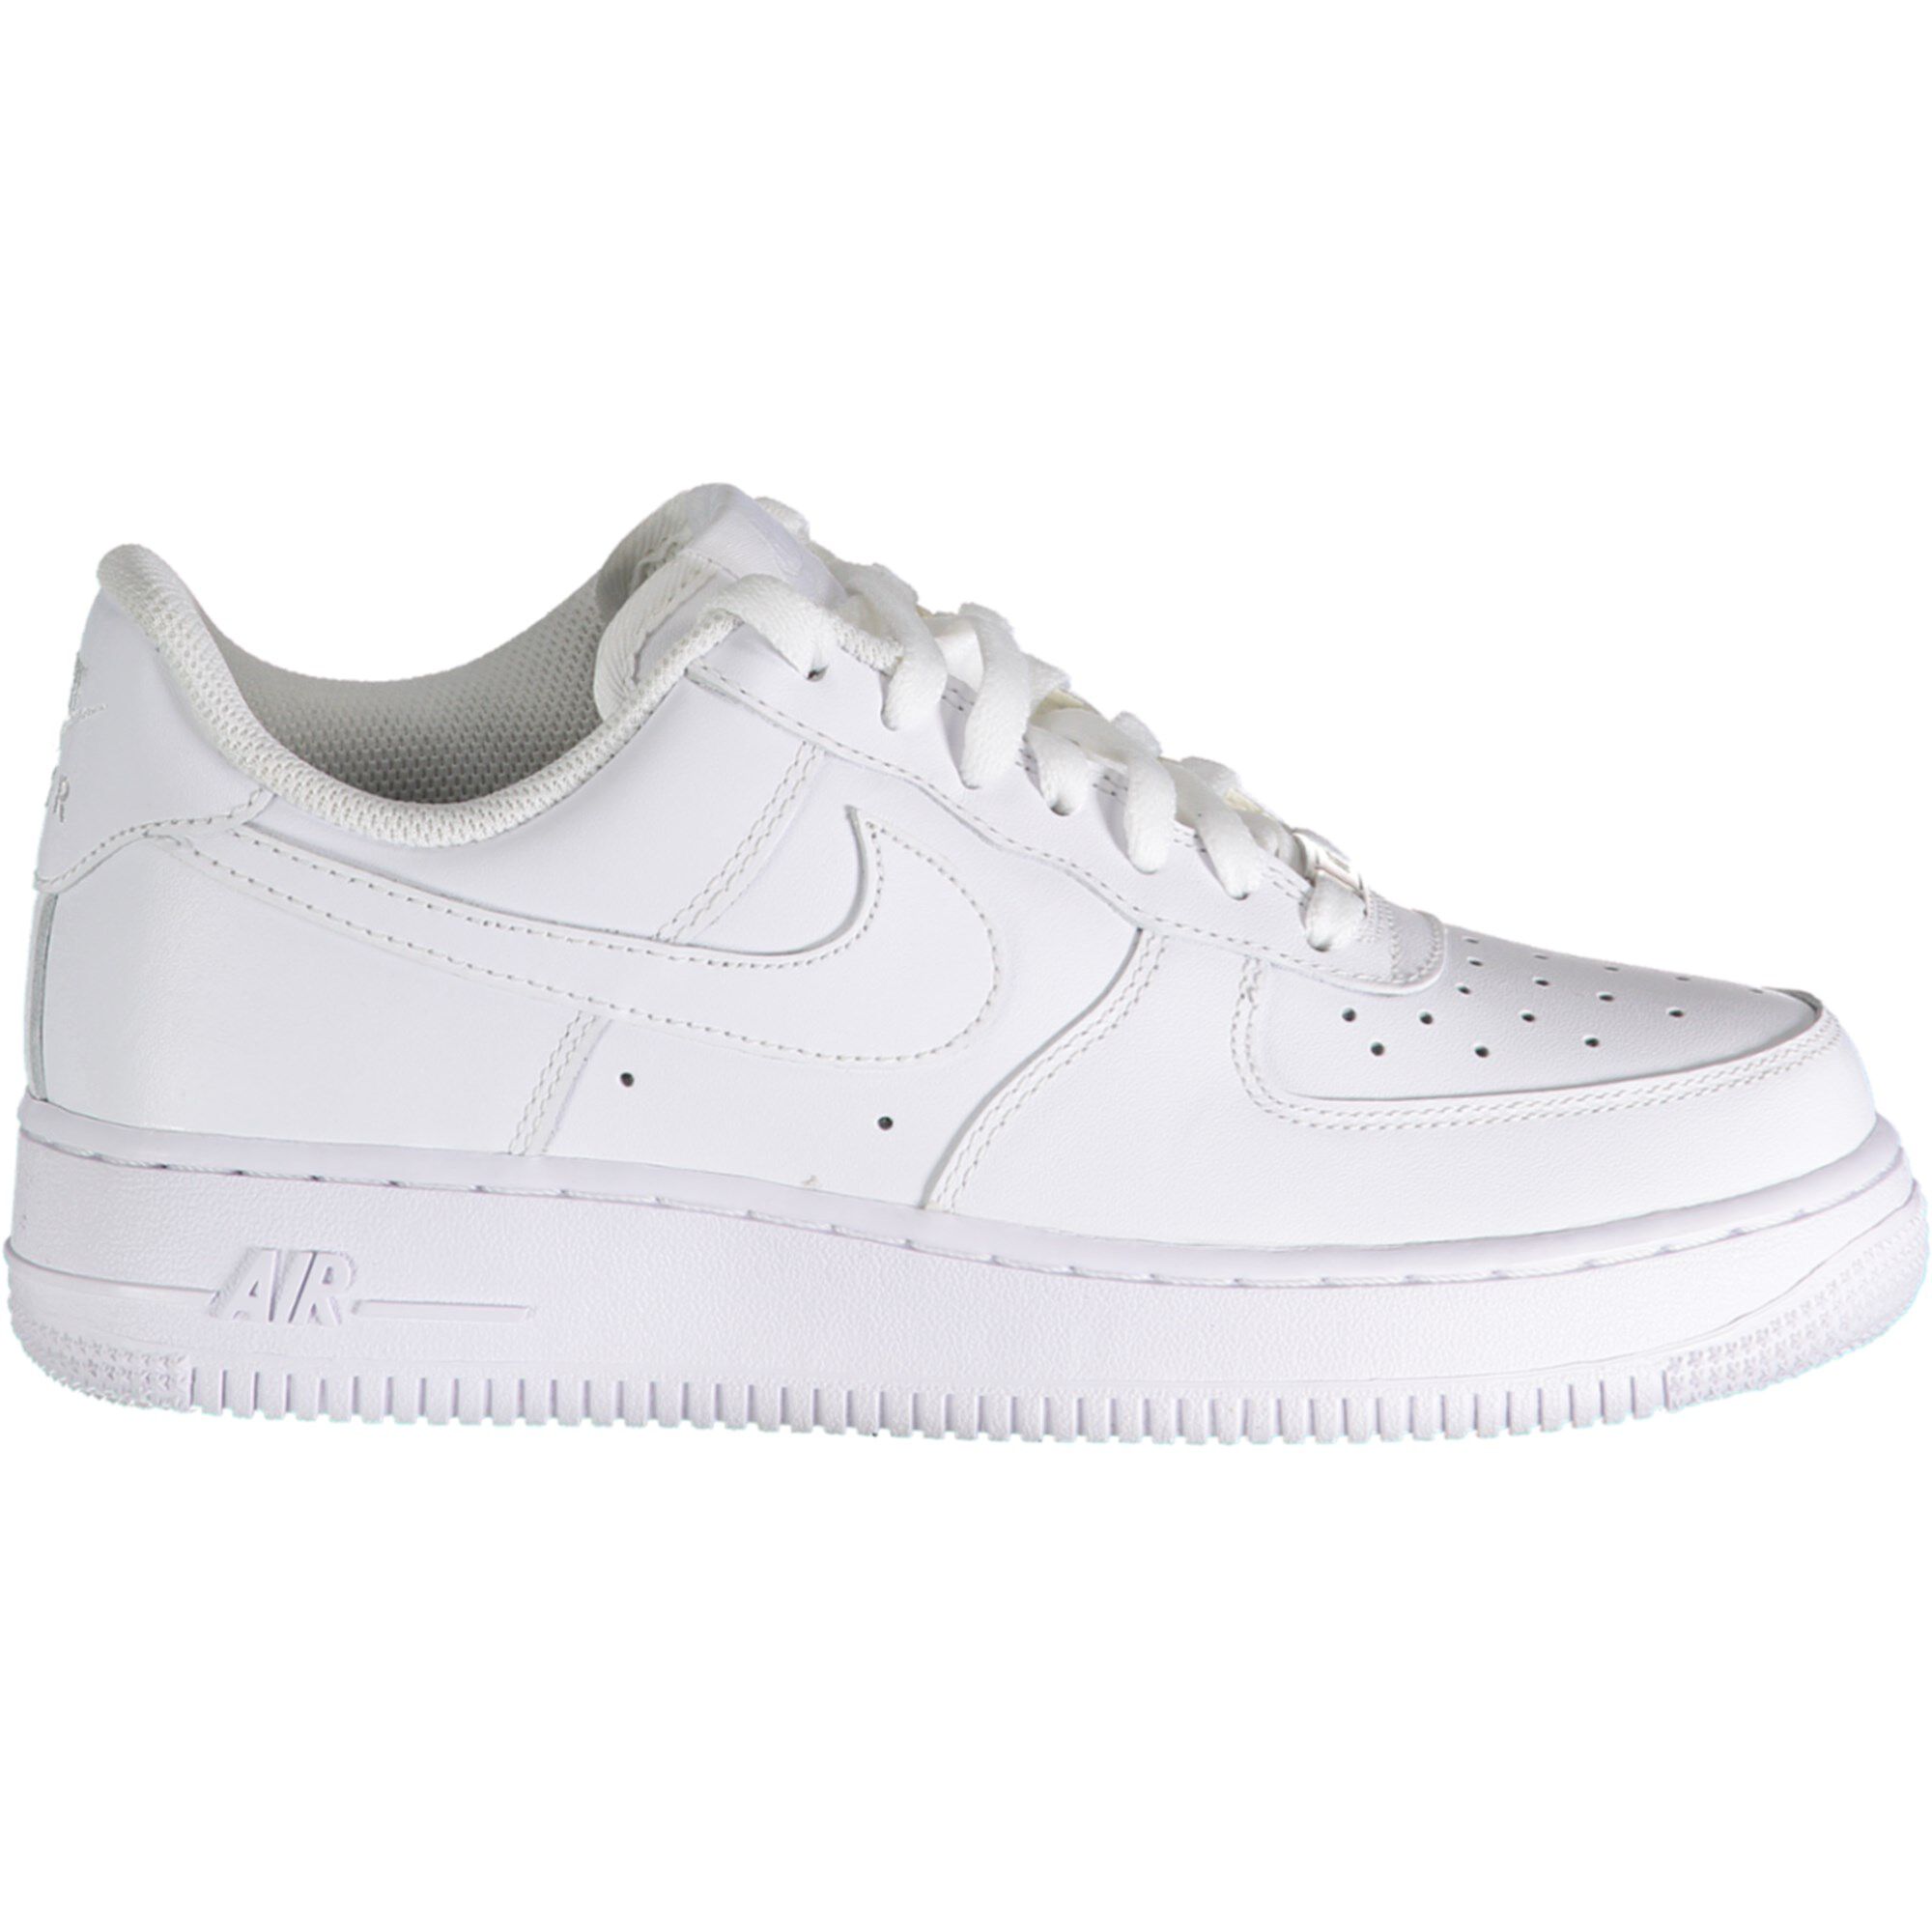 intersport nike air force 1 cheap online